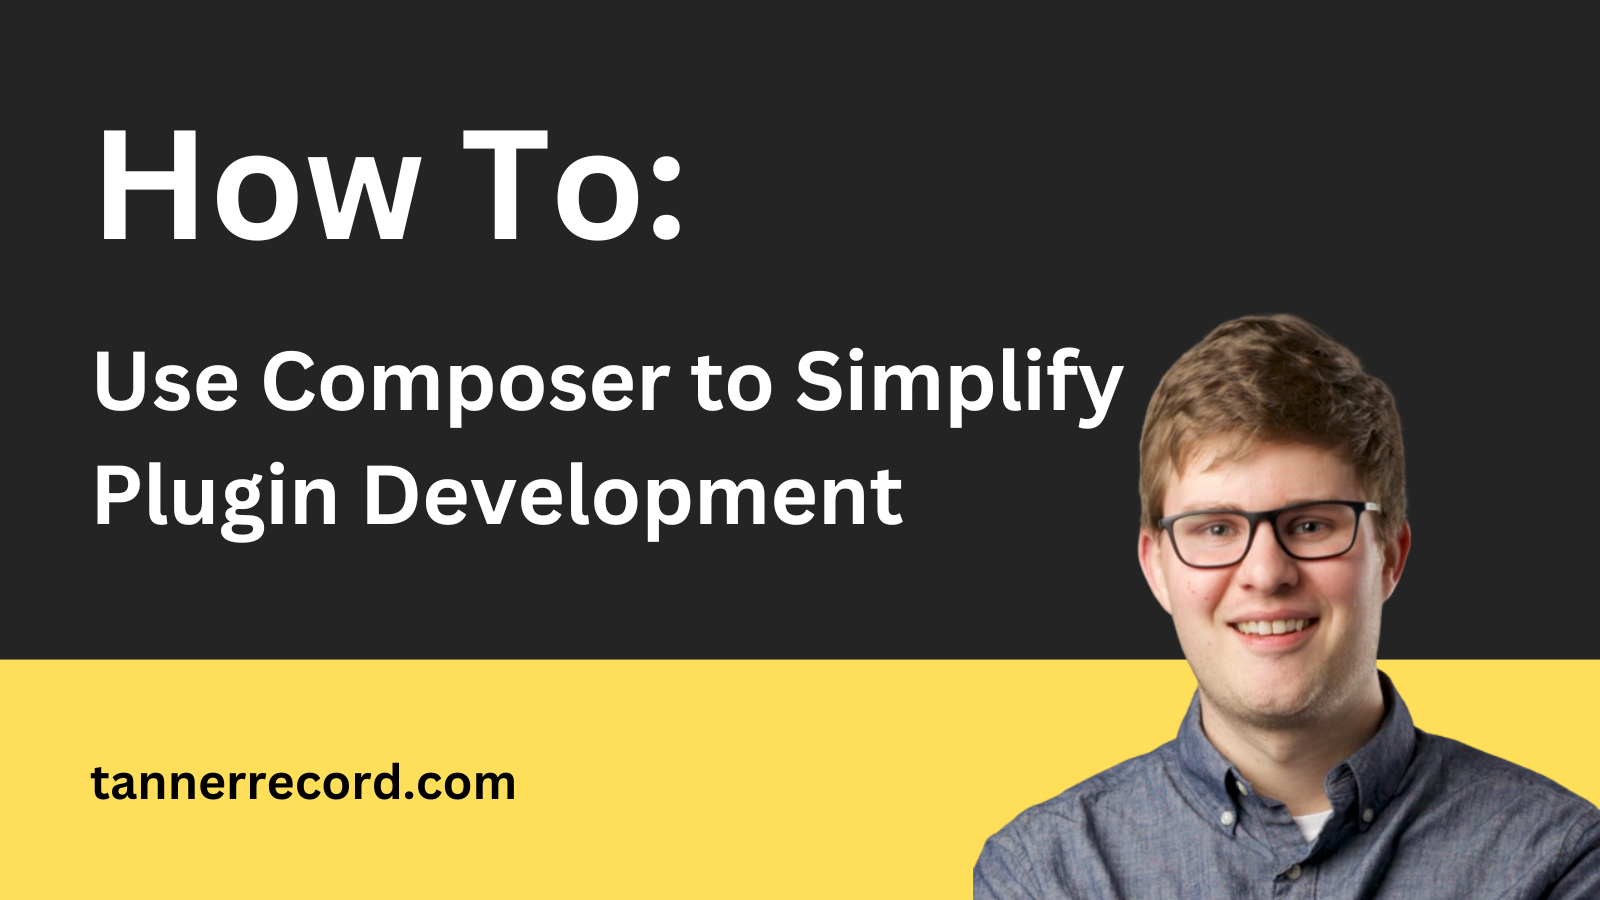 SWPD #007: How to Use Composer to Simplify Plugin Development